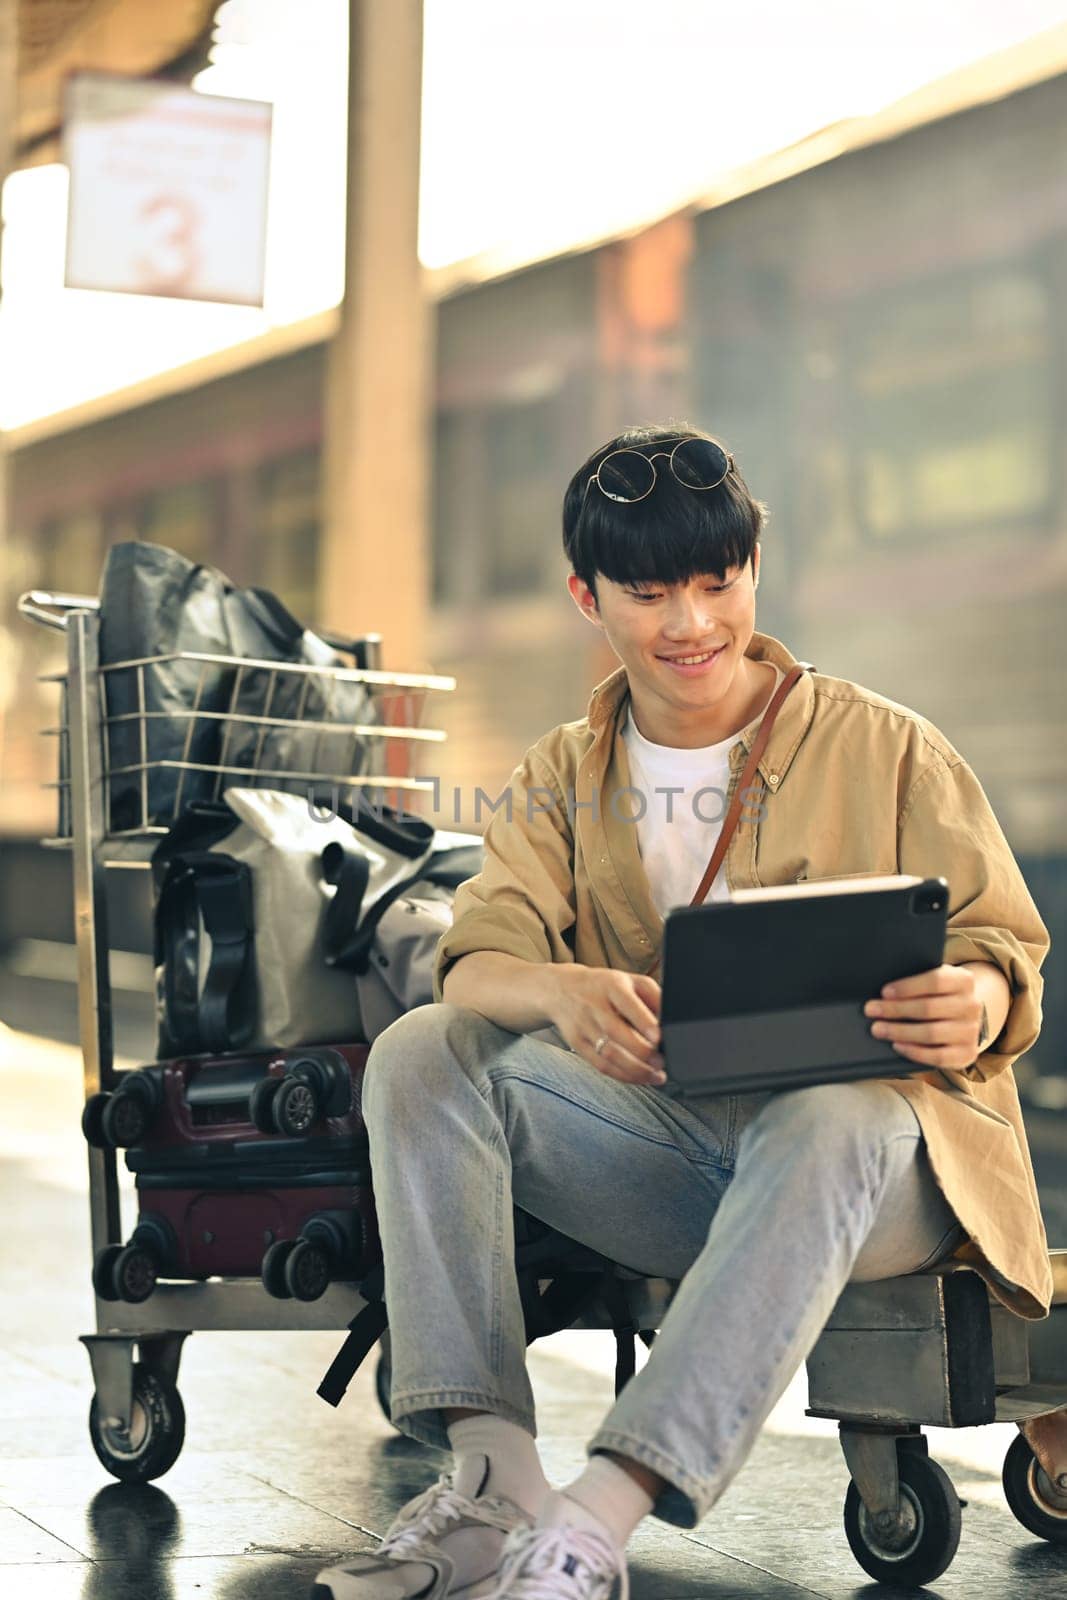 Smiling young man sitting on luggage cart and using digital tablet, waiting for the train by prathanchorruangsak